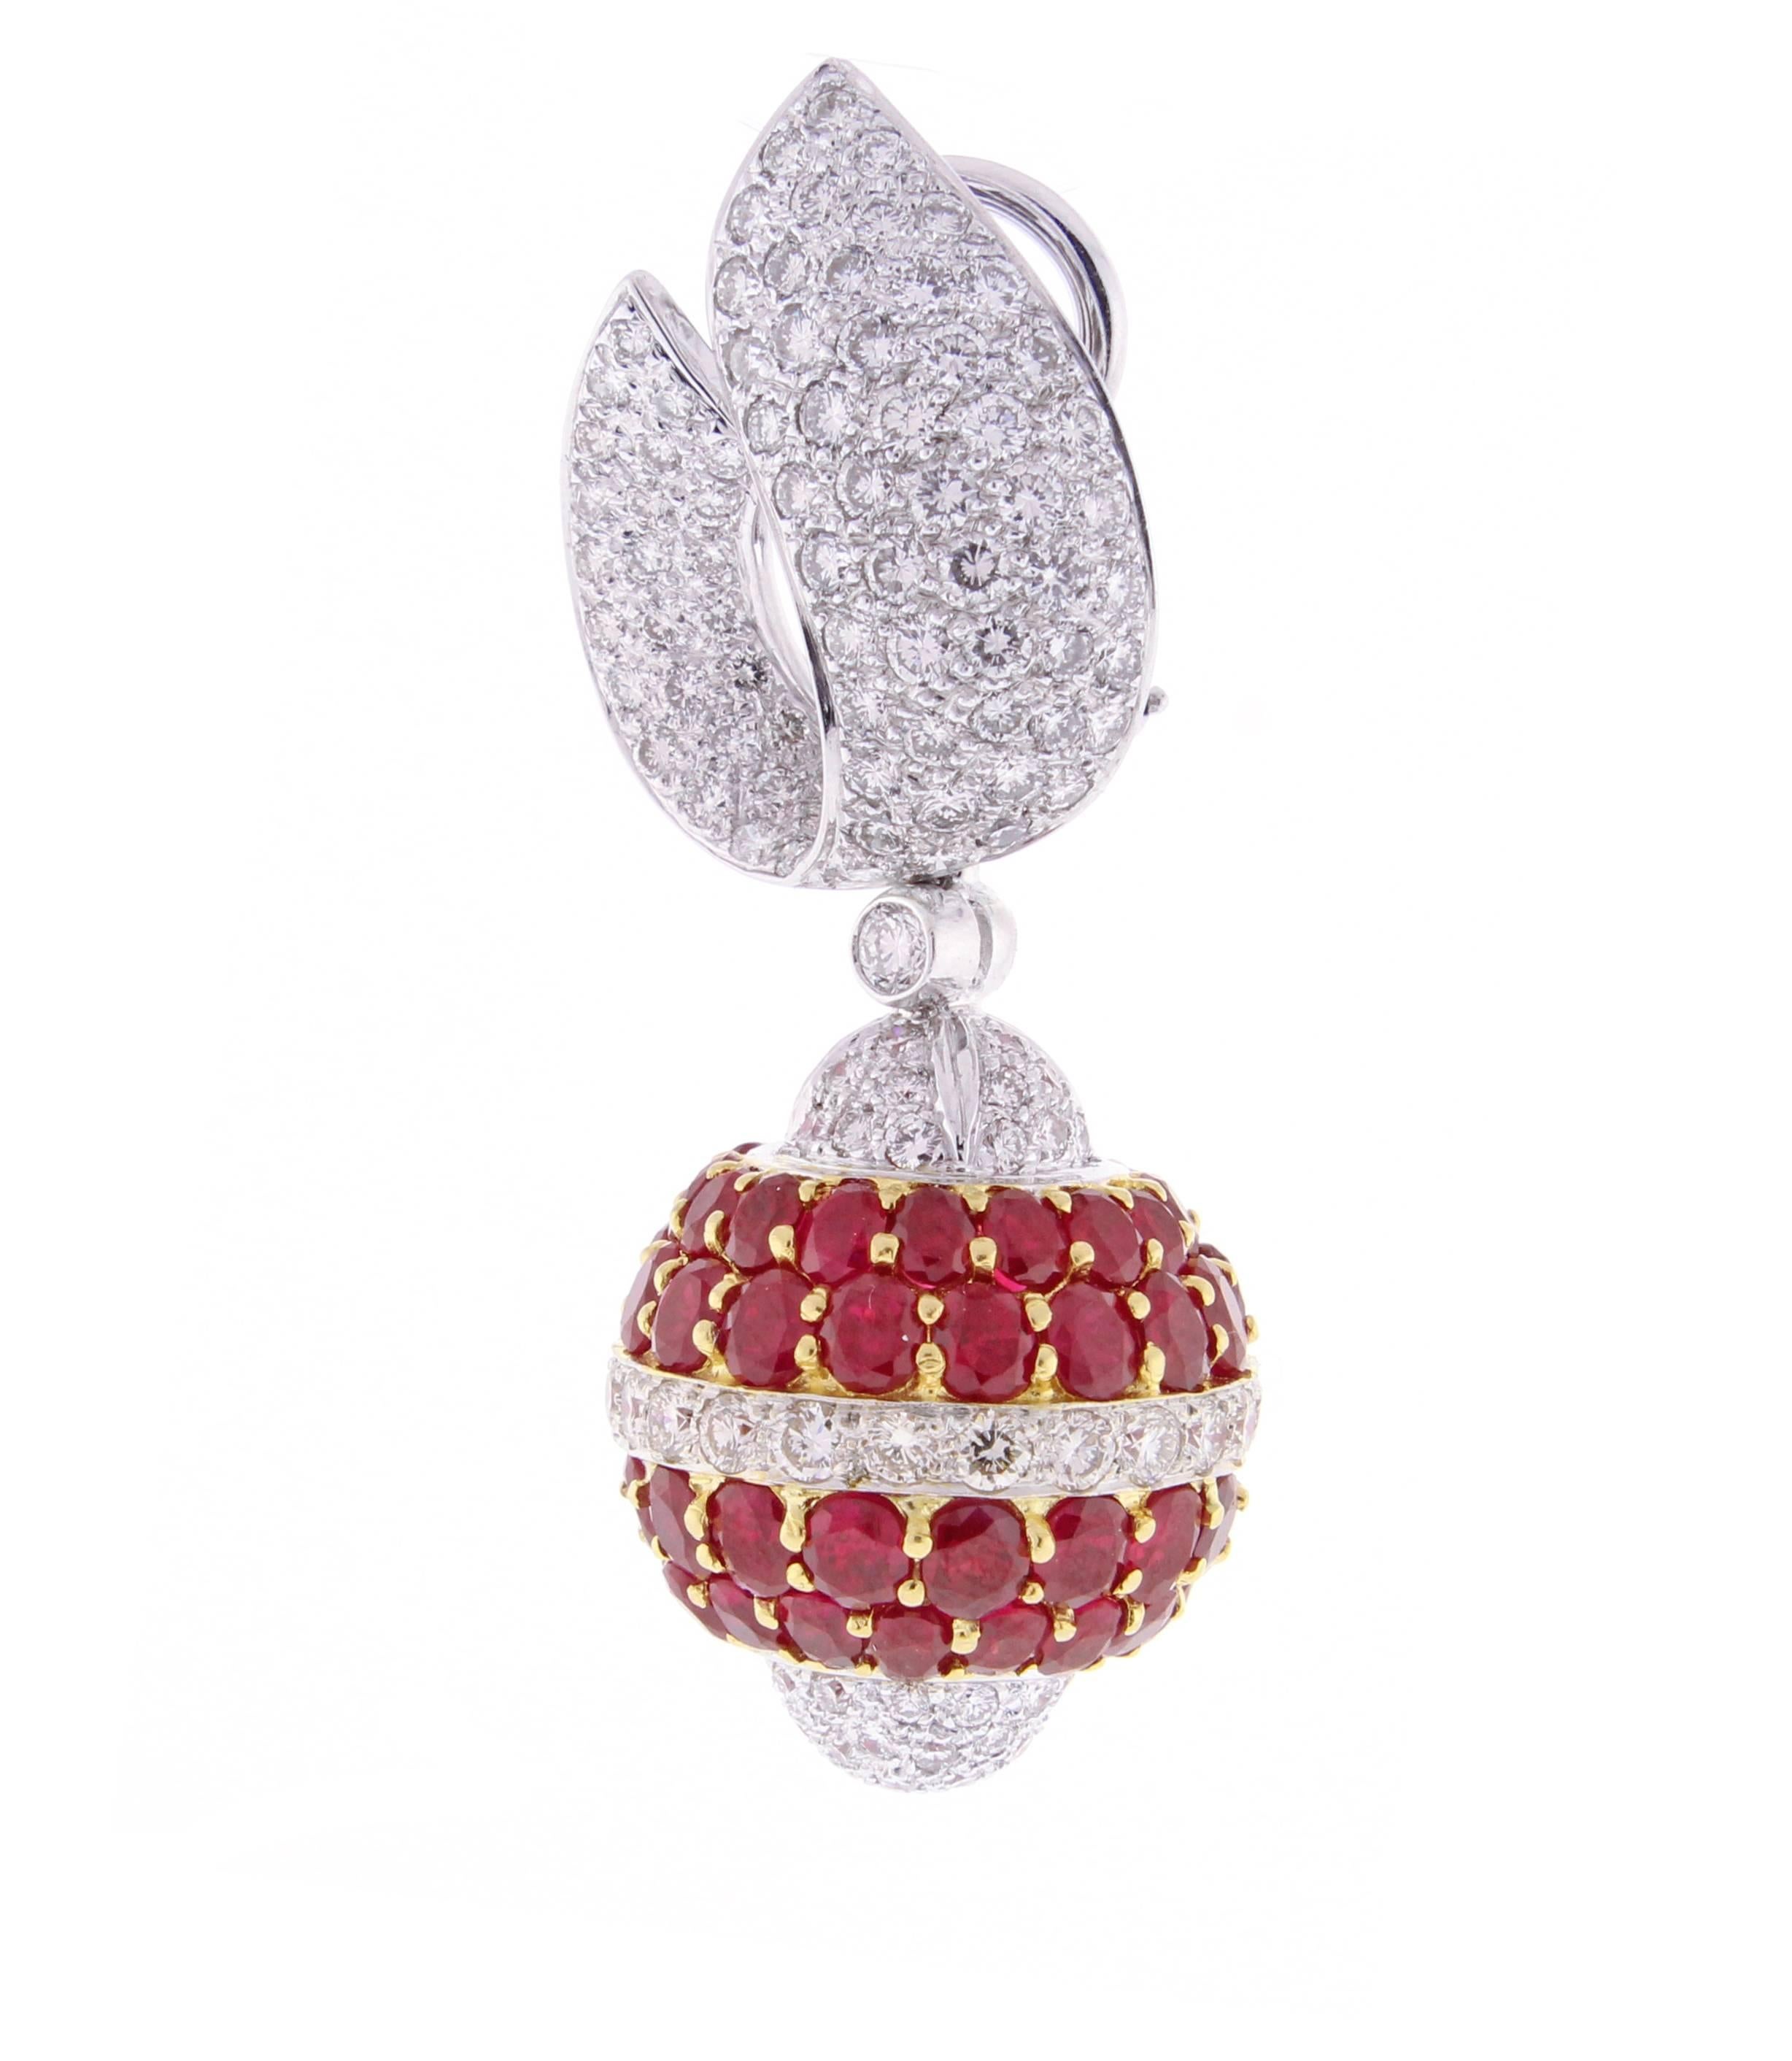 Highly important pair of ruby and pave′ set diamond earrings.  The earrings feature an ornamental drop of rubies and diamonds. The drop measures 3/4 of an inch wide and an inch high.  The overall height of the earrings is two inches. 314 brilliant